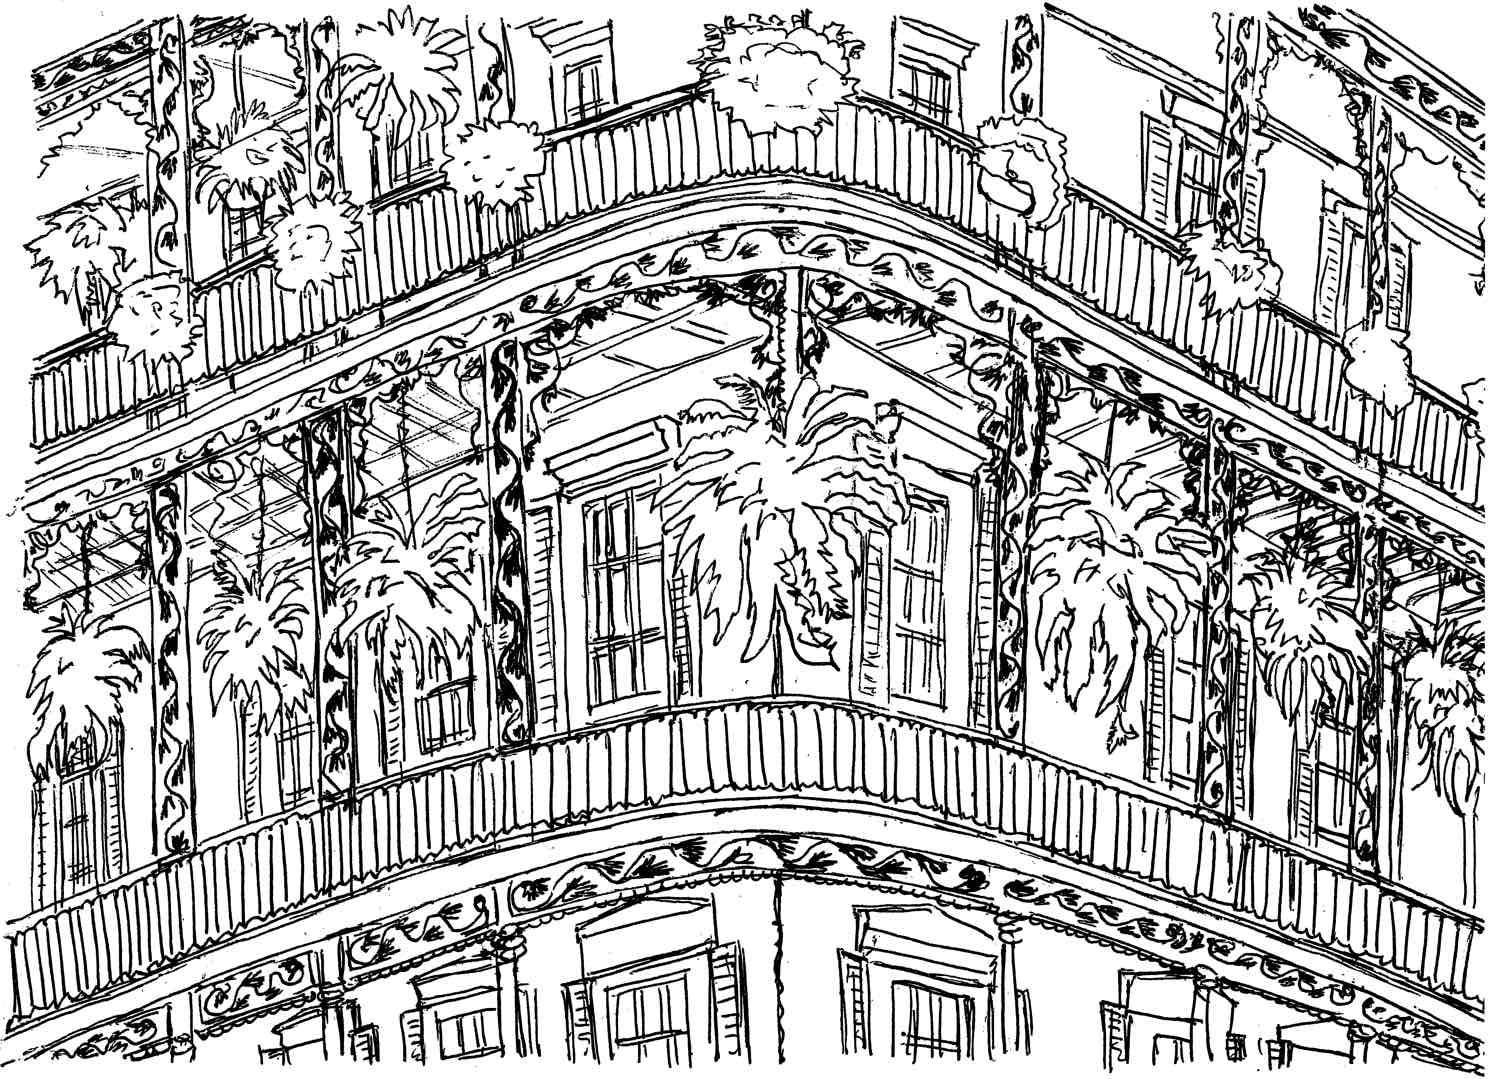 PEN & INK - FRENCH QUARTER APARTMENT BUILDING WITH FERNS